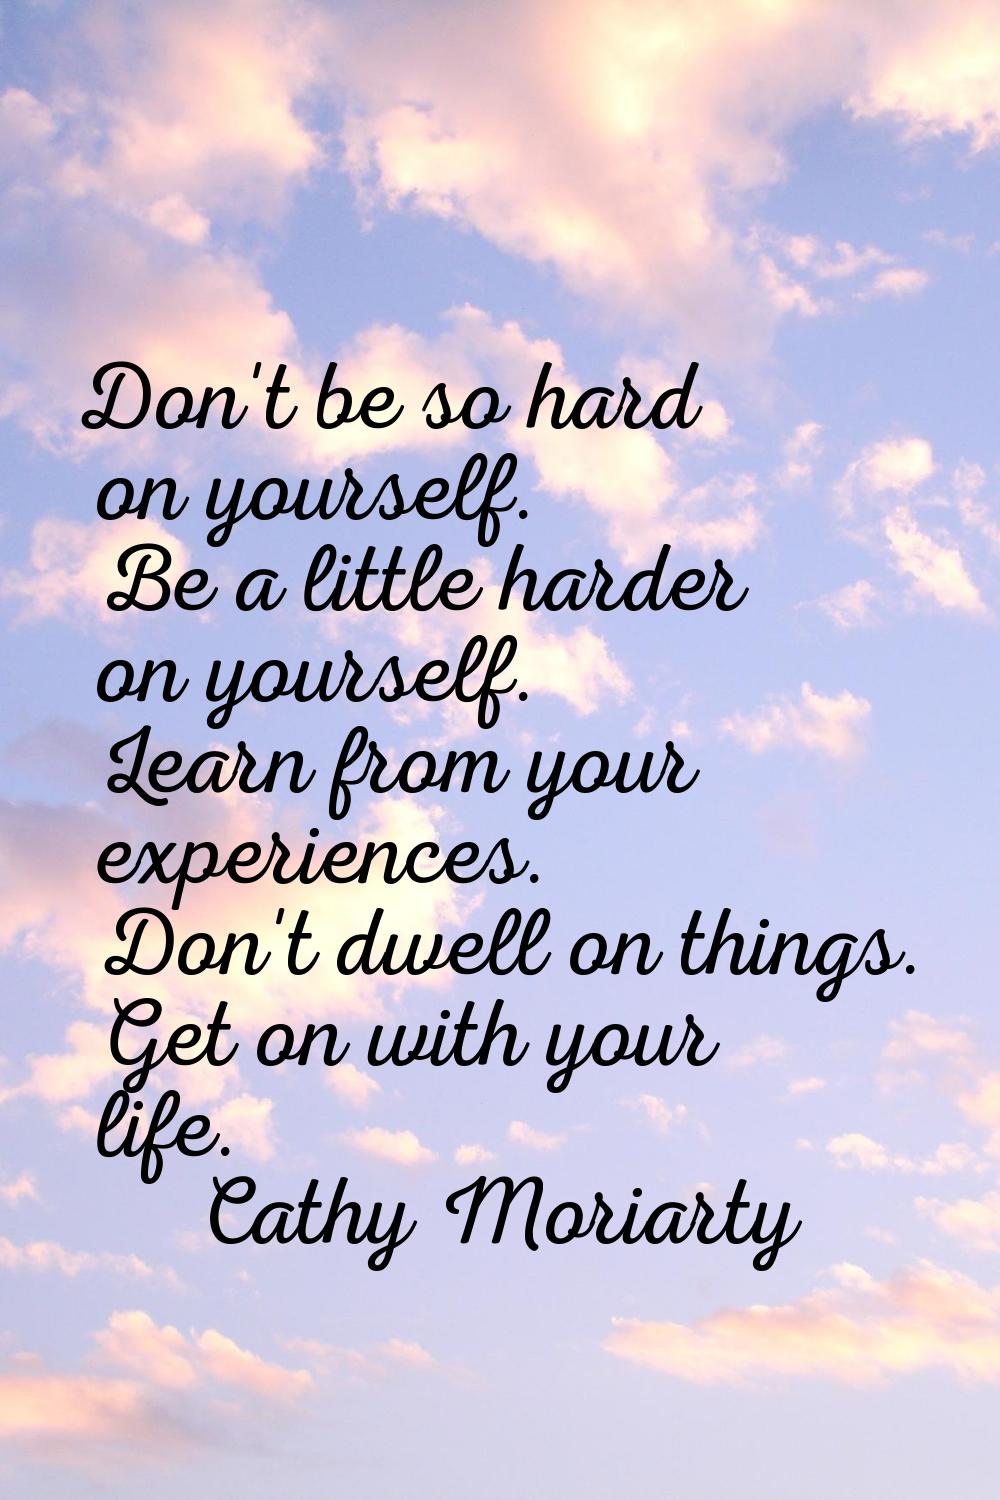 Don't be so hard on yourself. Be a little harder on yourself. Learn from your experiences. Don't dw